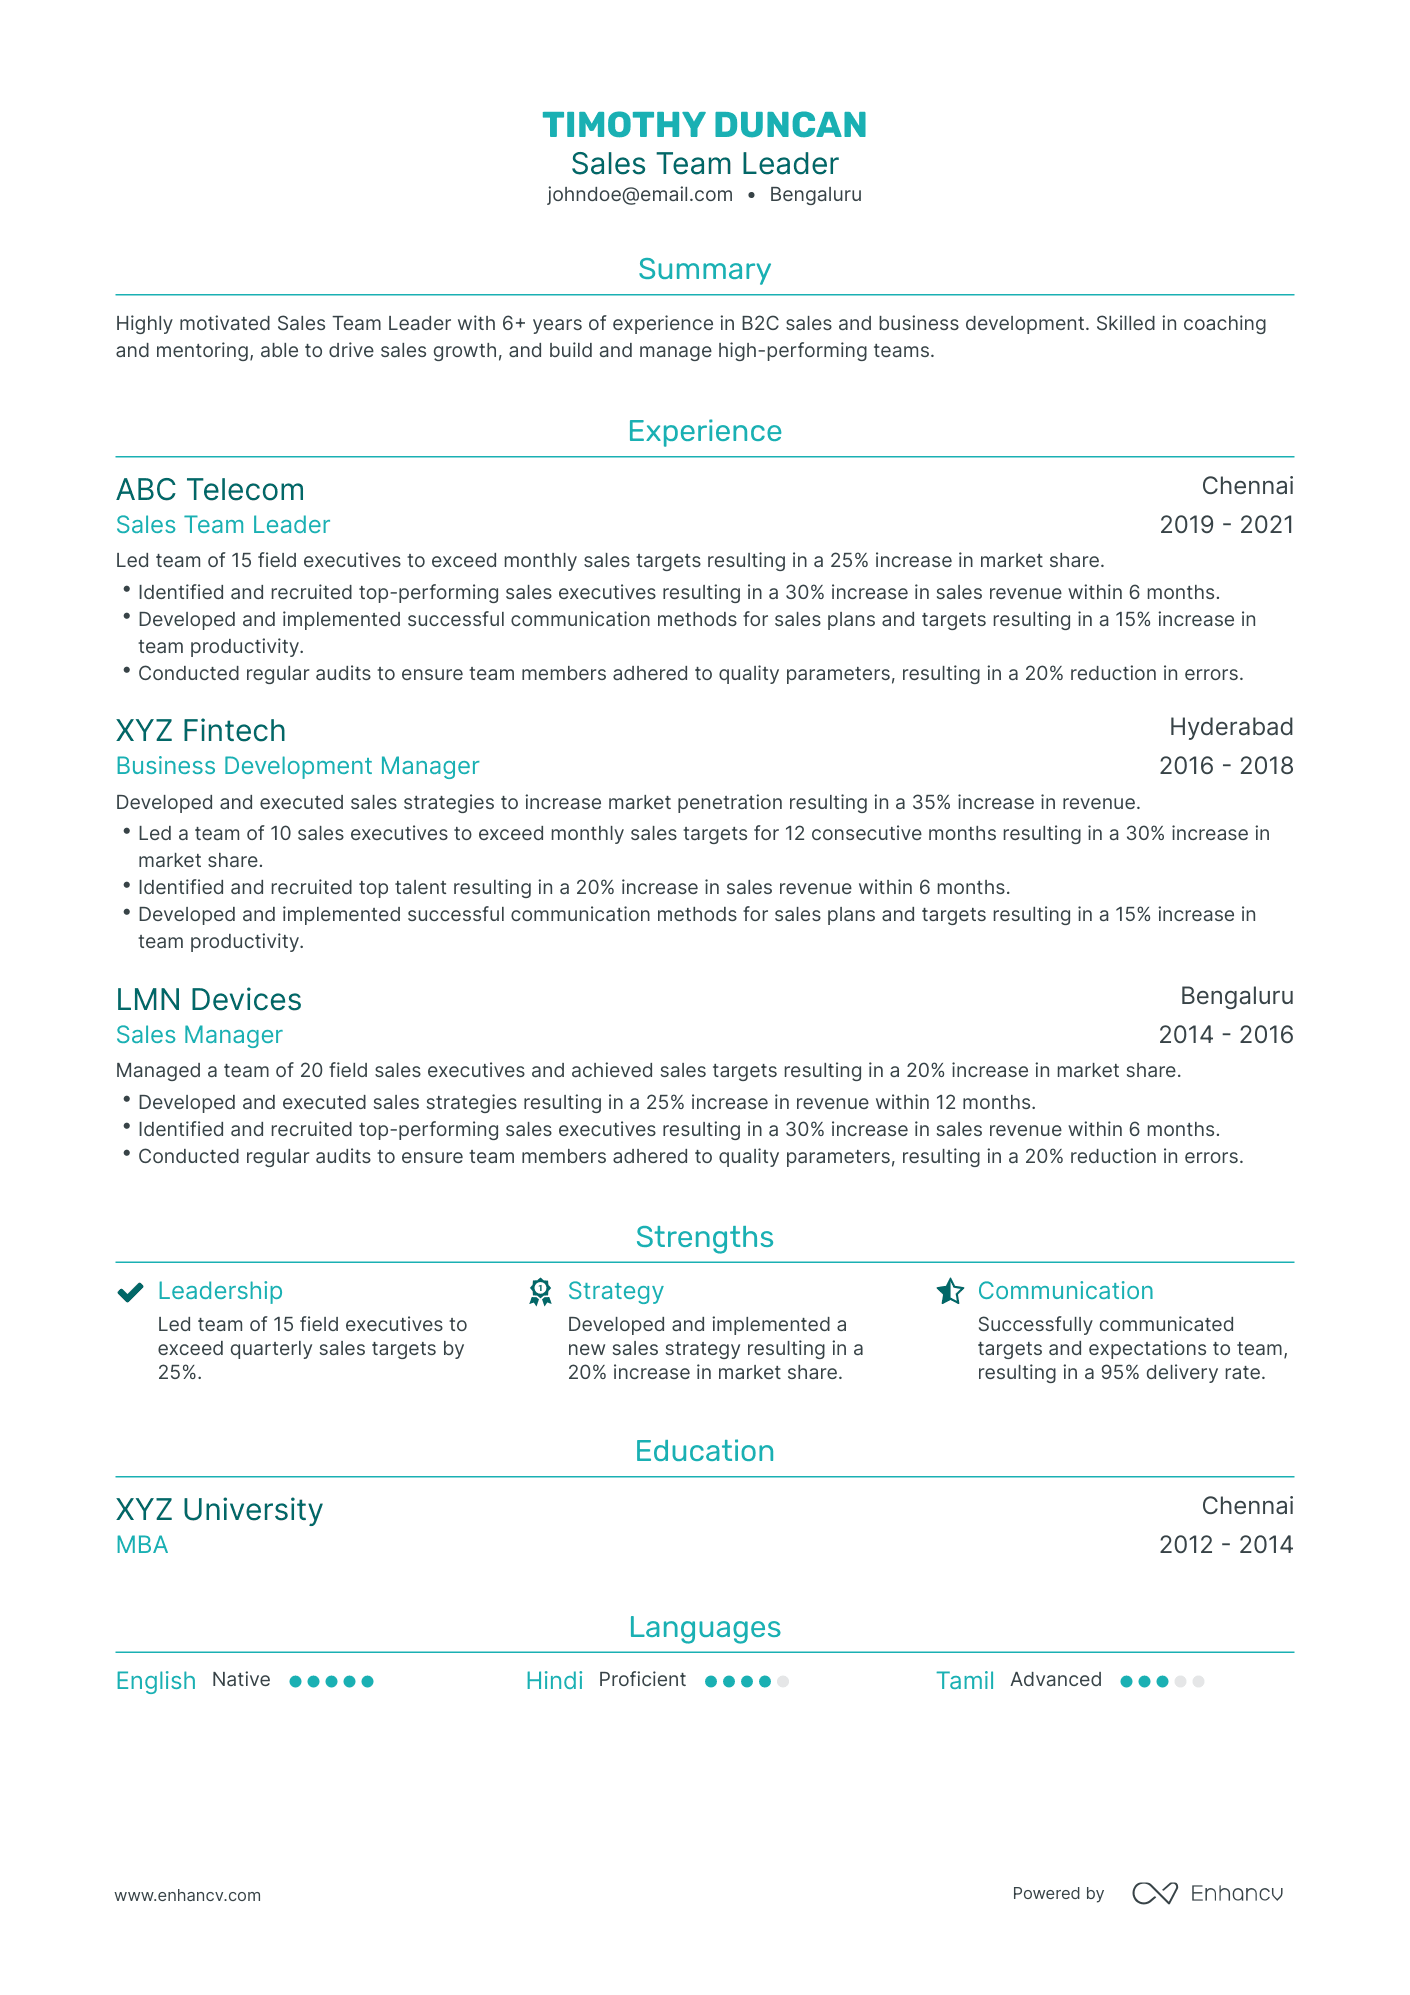 Traditional Sales Team Leader Resume Template